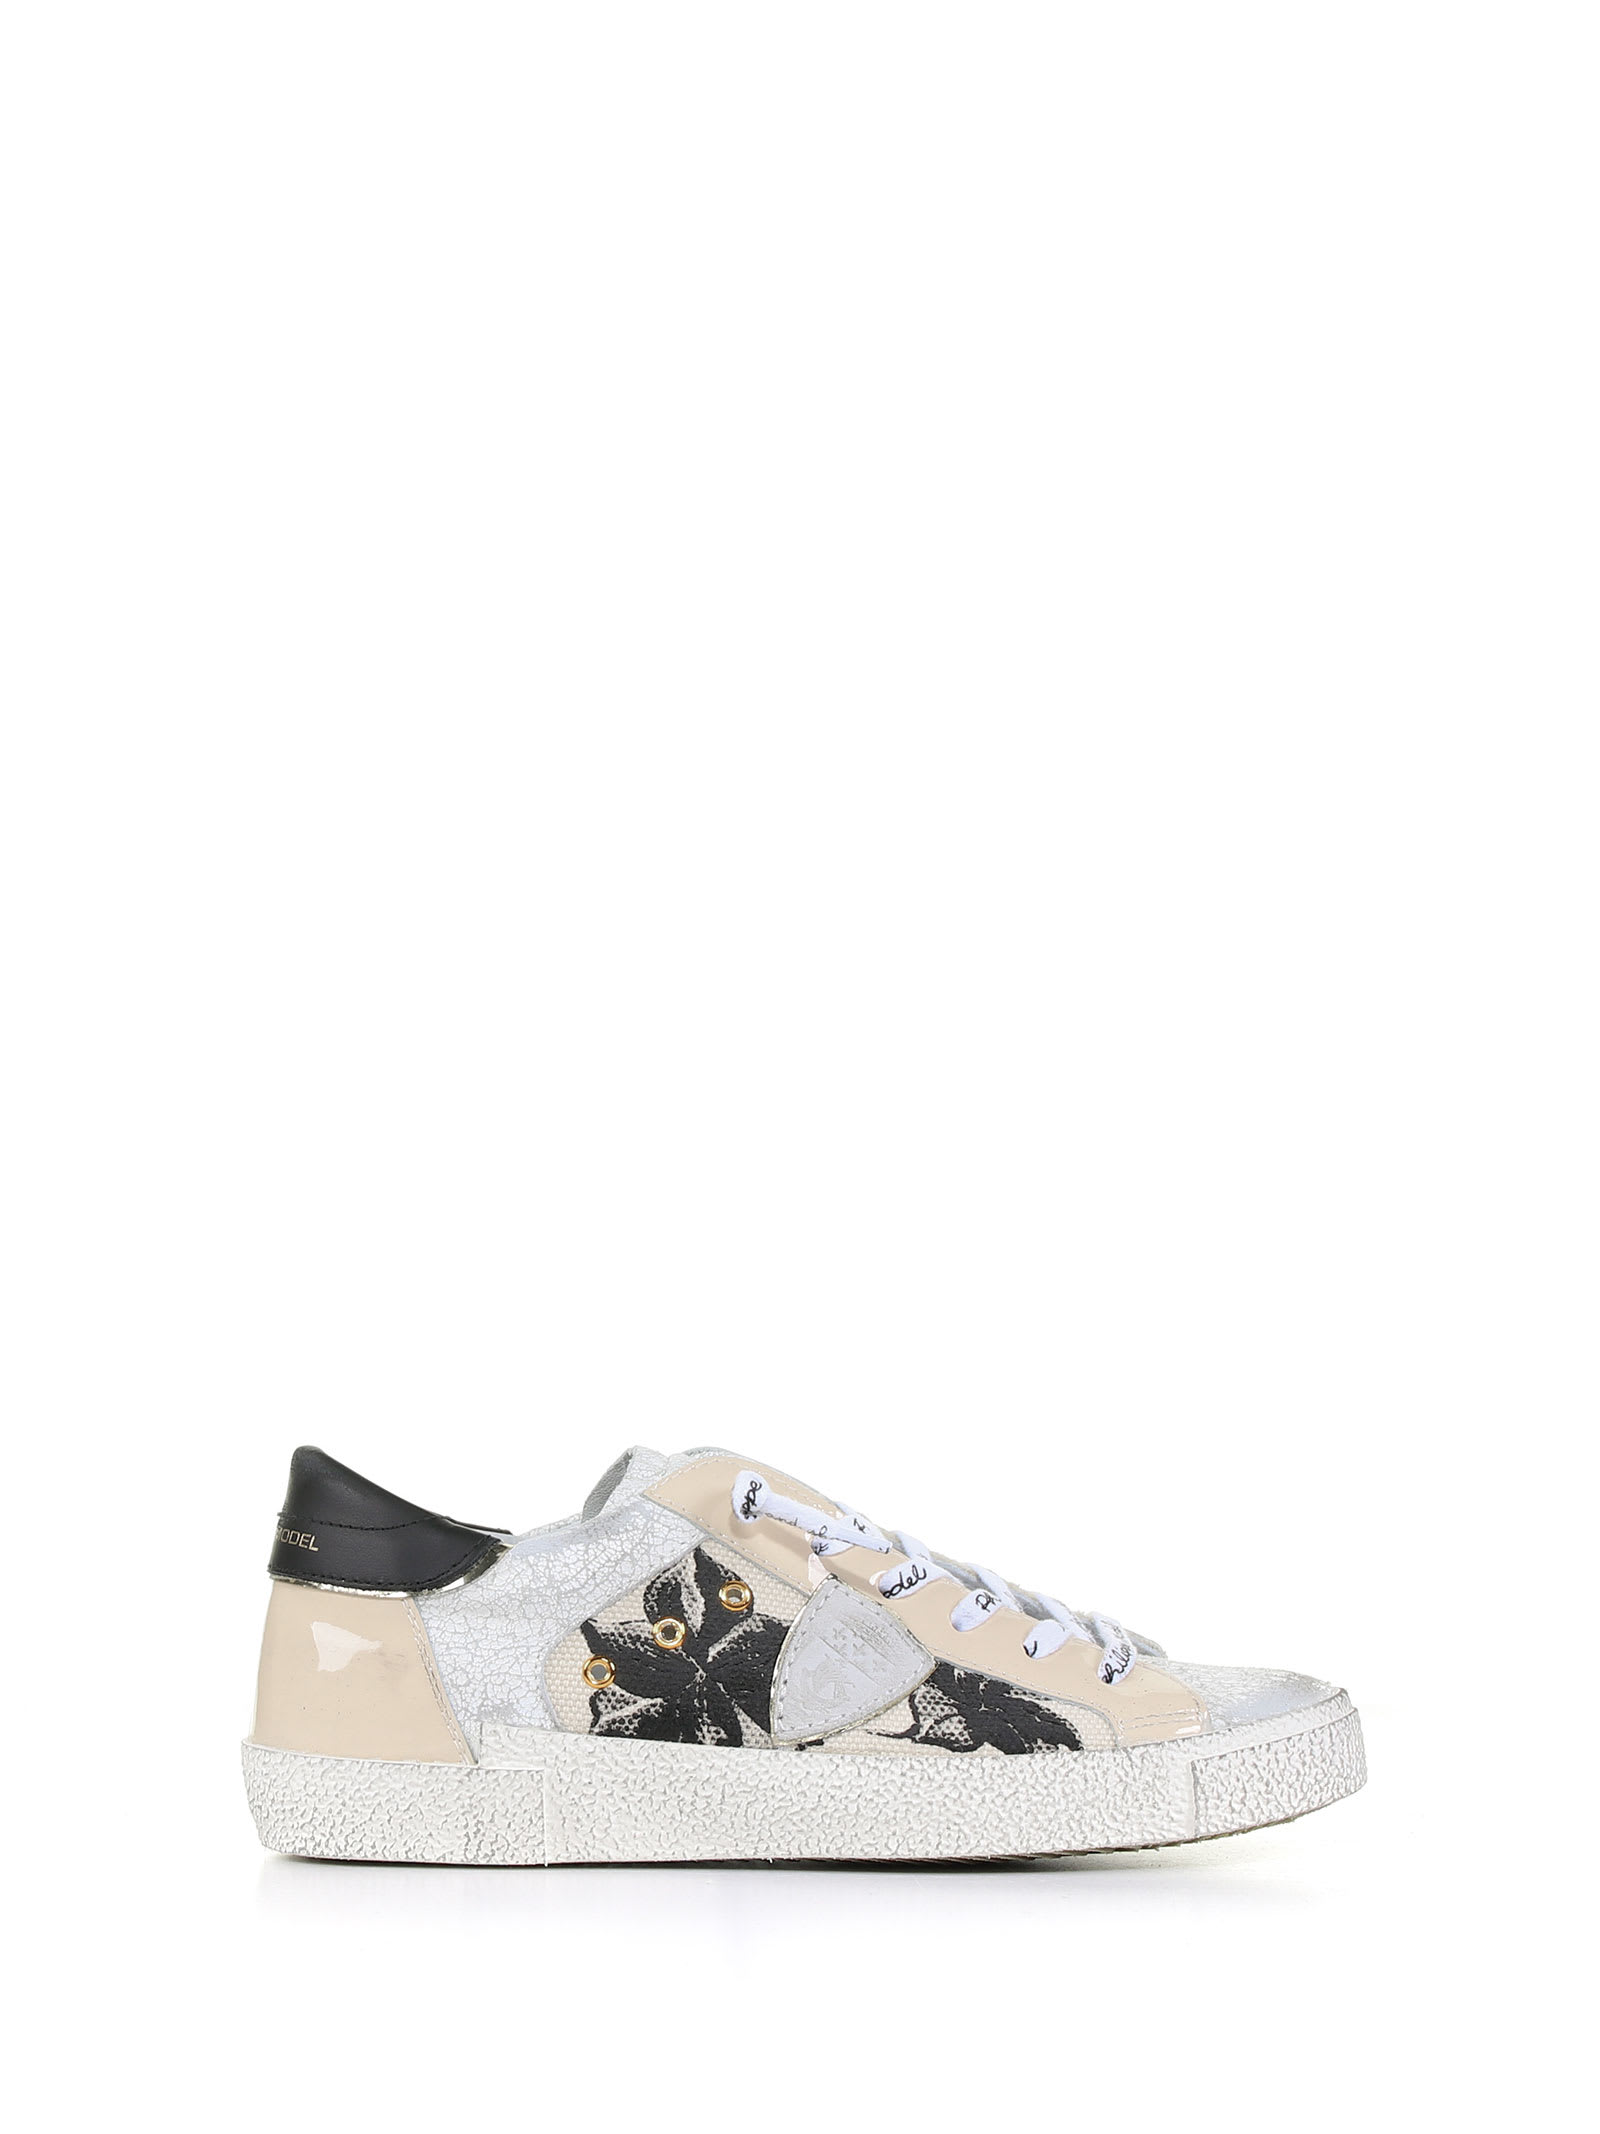 Philippe Model Low Woman Camouflage Sneaker